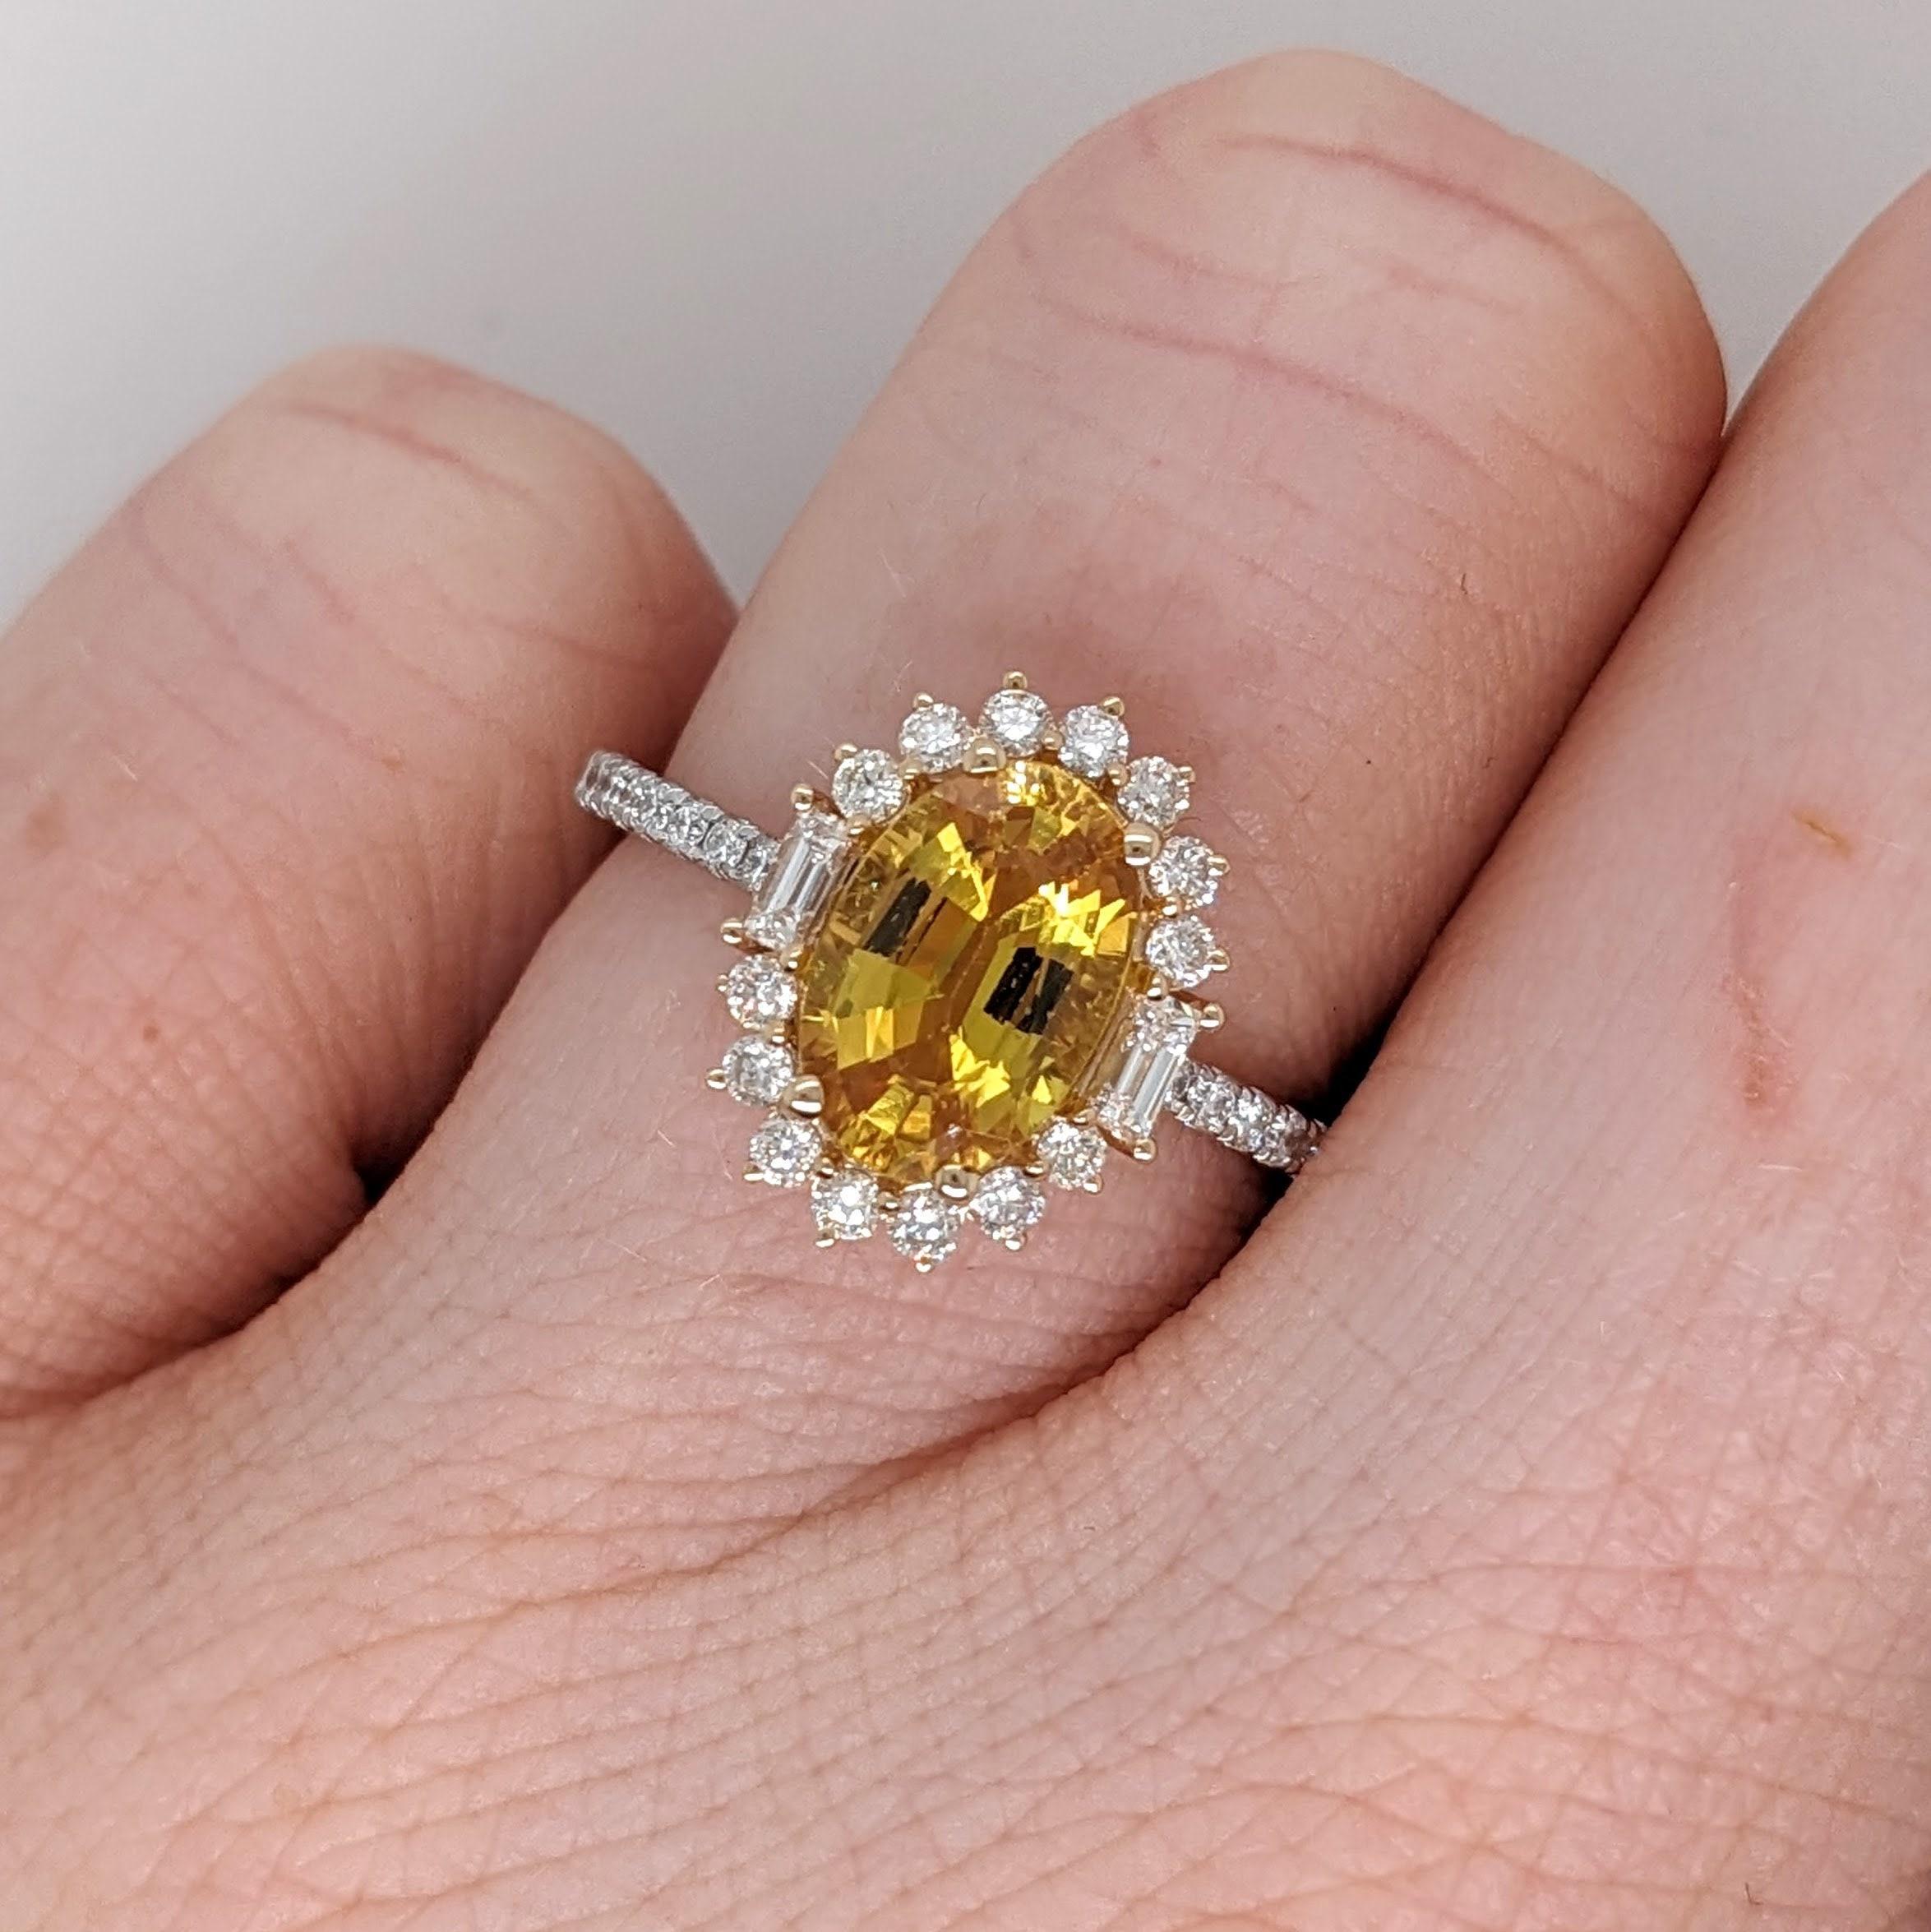 This ring features a 2.10 carat oval cut yellow sapphire accented by sunburst design of natural earth mined diamond accents. This ring makes a beautiful september birthstone for your loved ones! 
 
Specifications

Item Type: Ring
Center Stone: